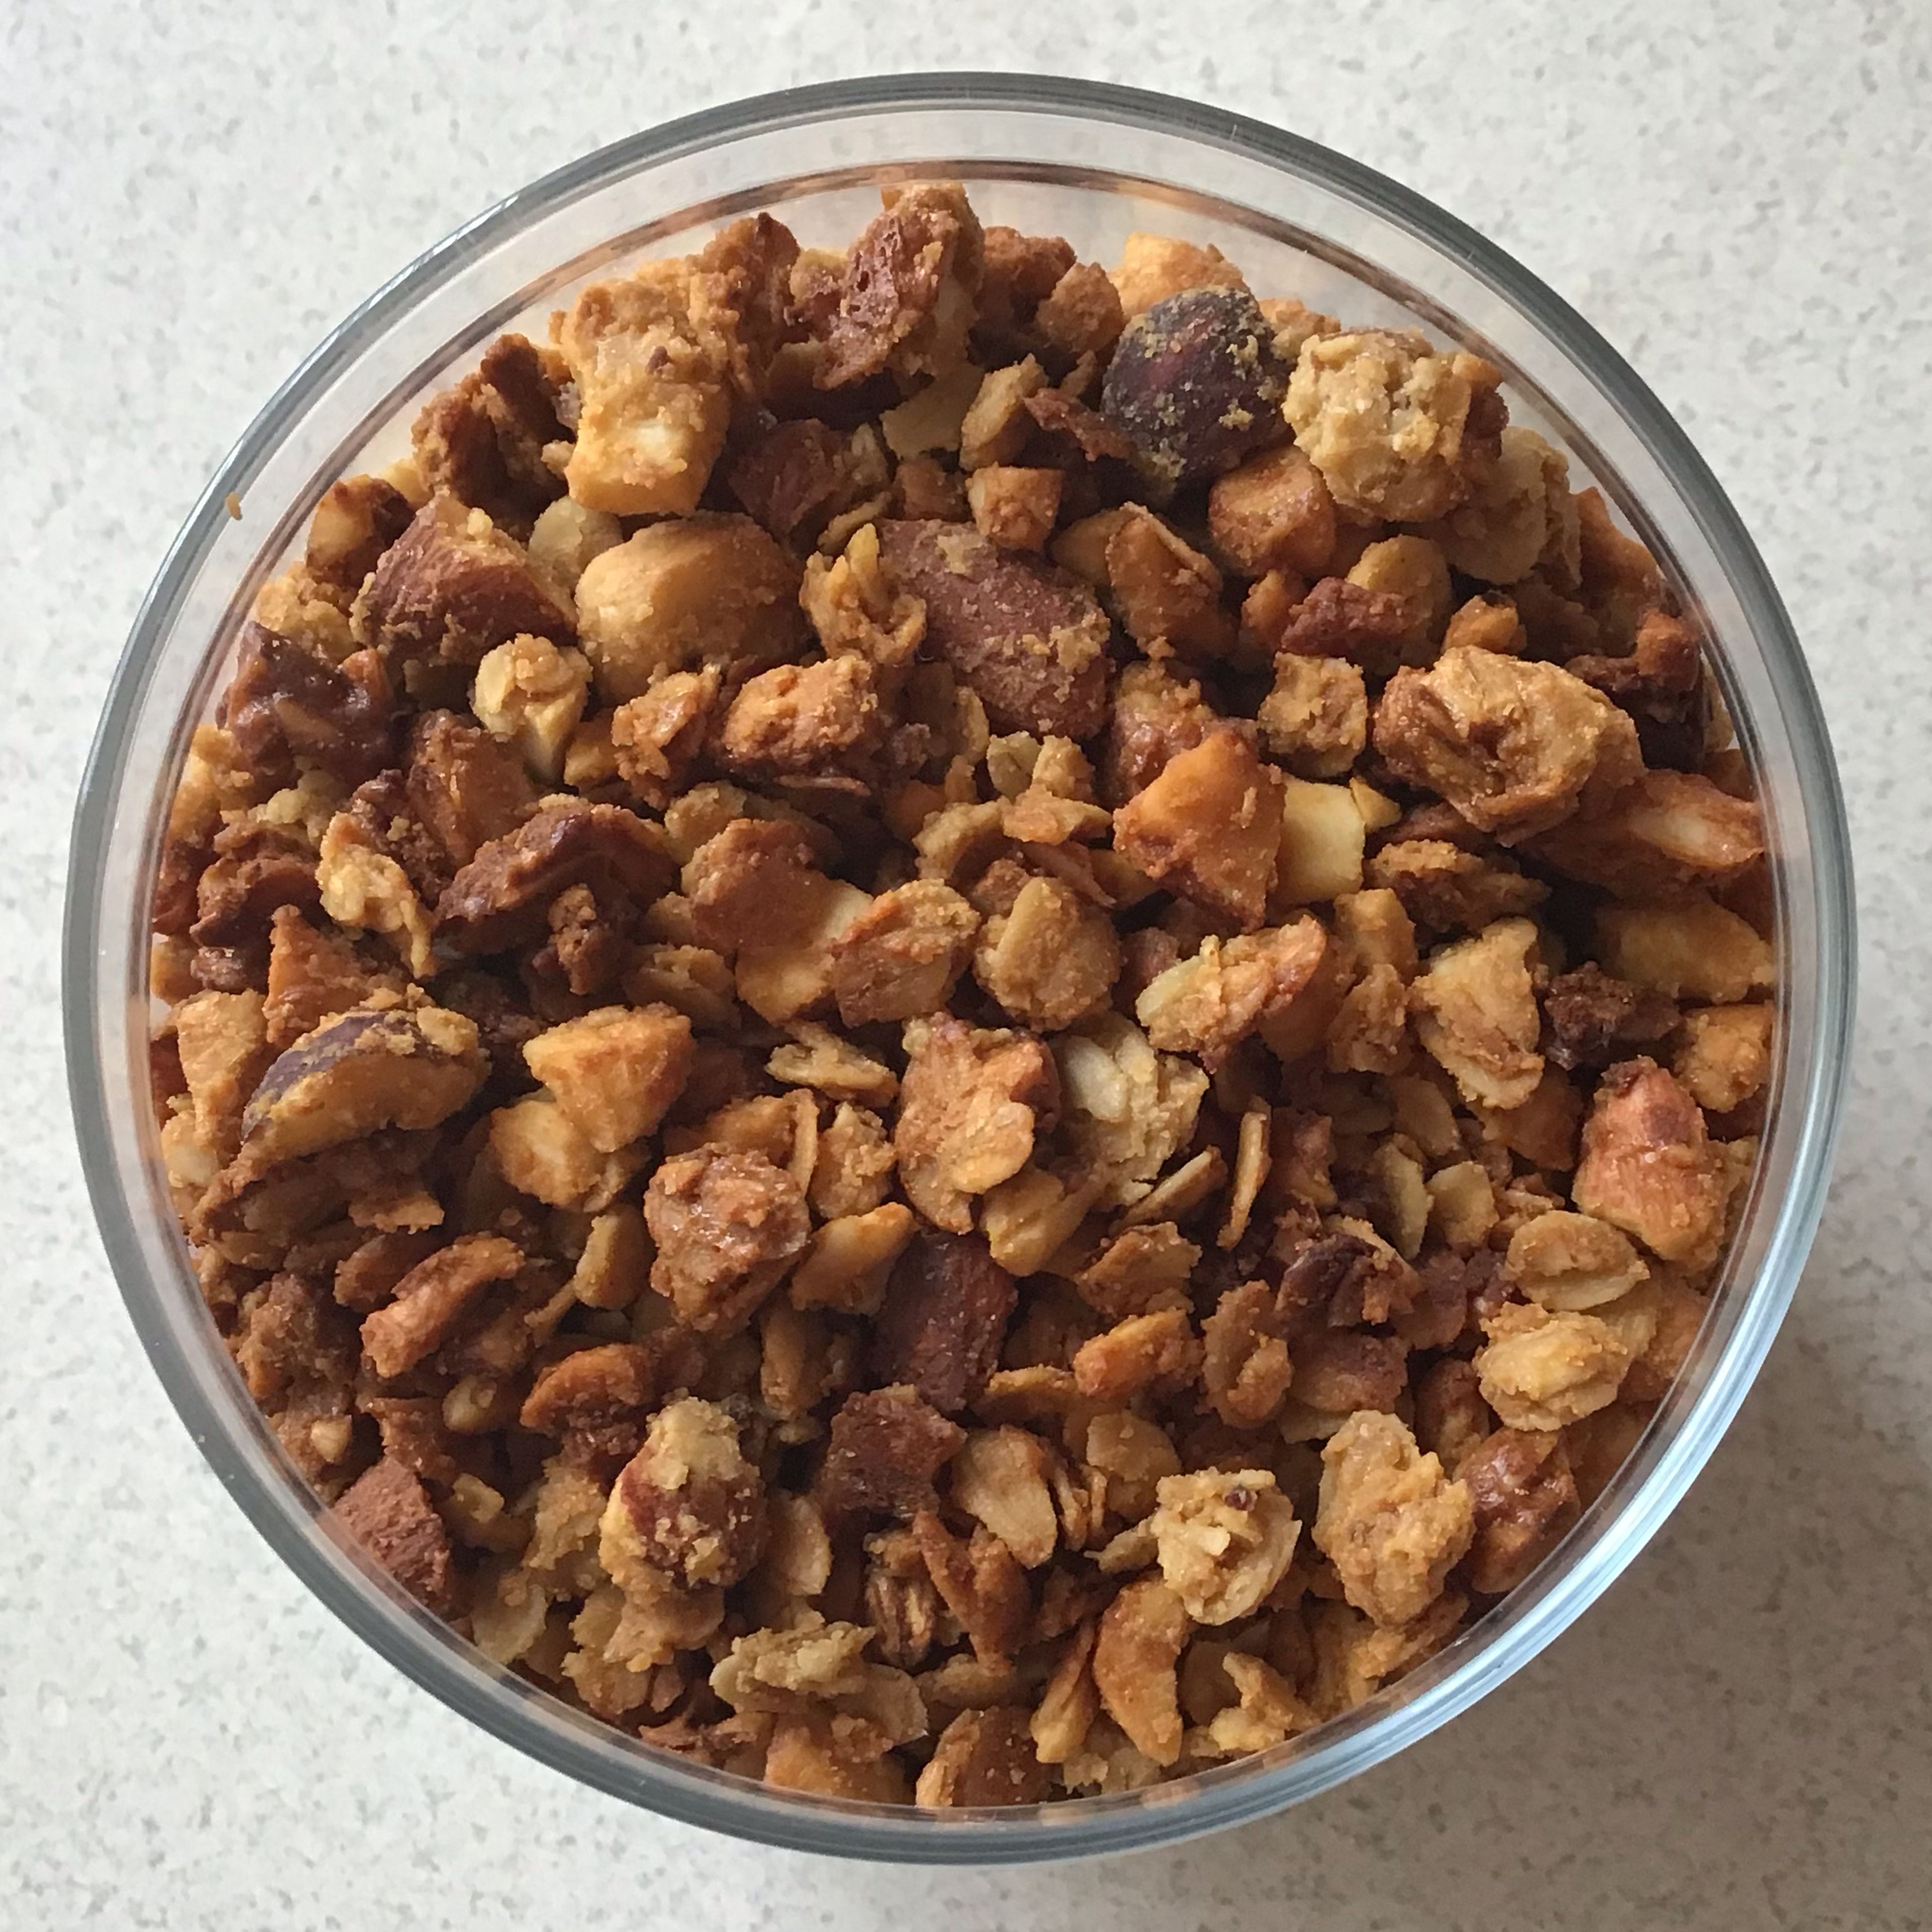 After our mixture has cooled we get a delicious granola